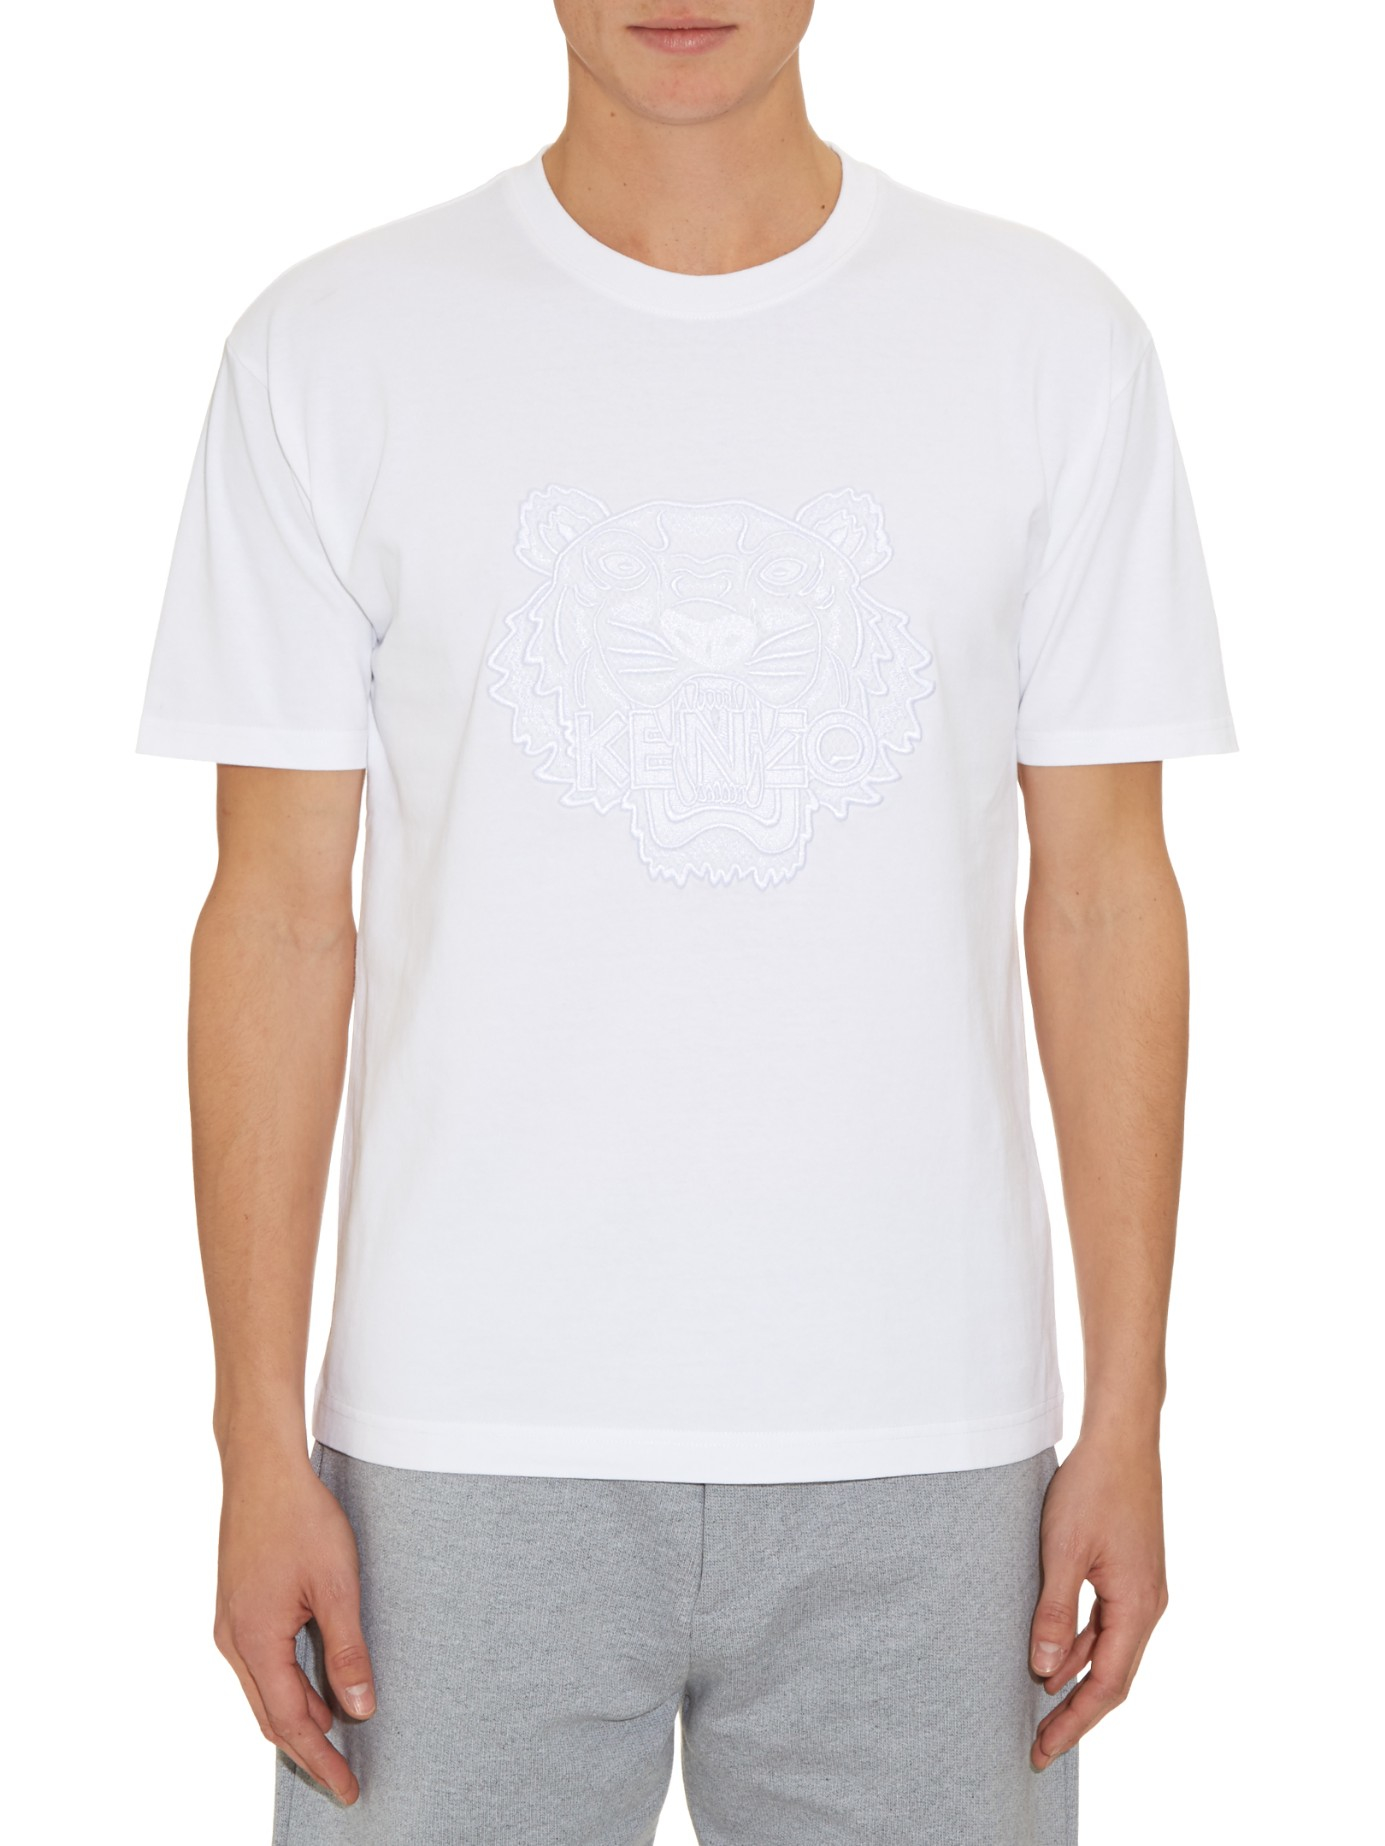 Lyst - Kenzo Embroidered Tiger-print Cotton T-shirt in White for Men